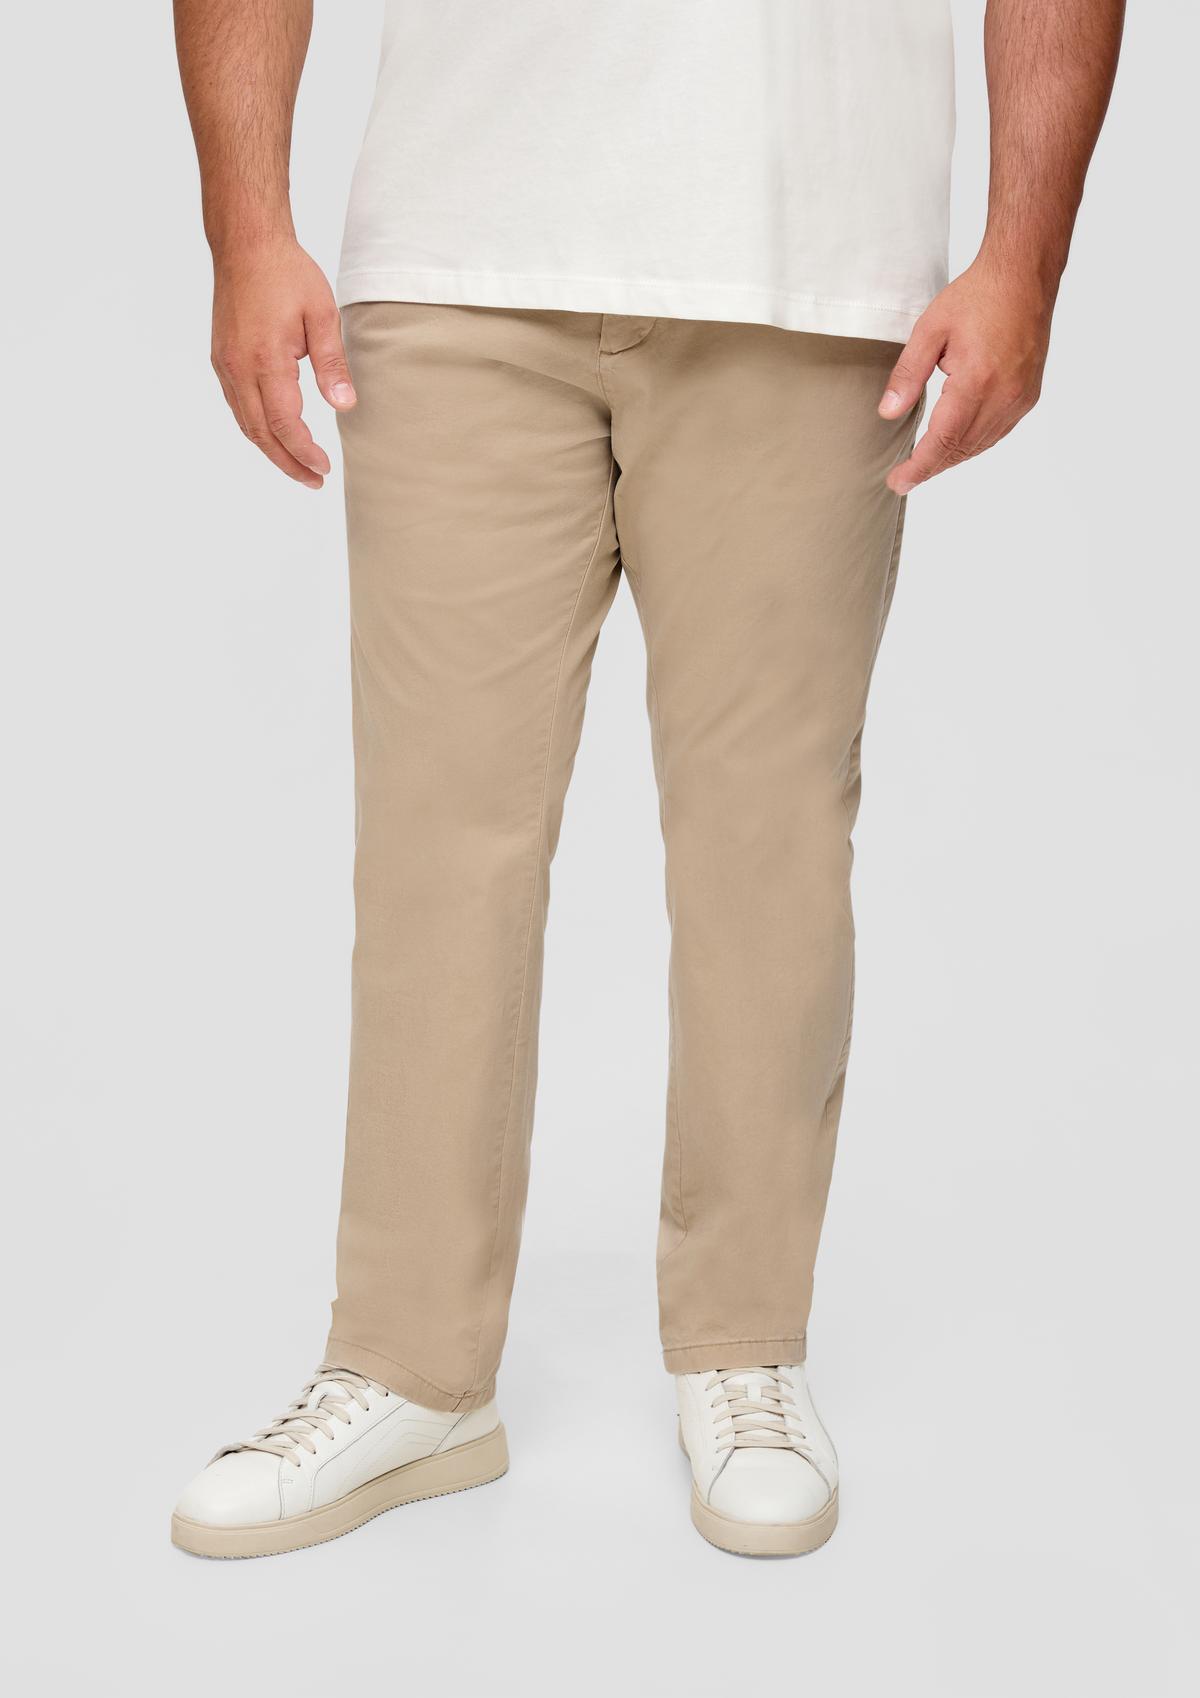 s.Oliver Detroit: chino nohavice strihu Relaxed Fit